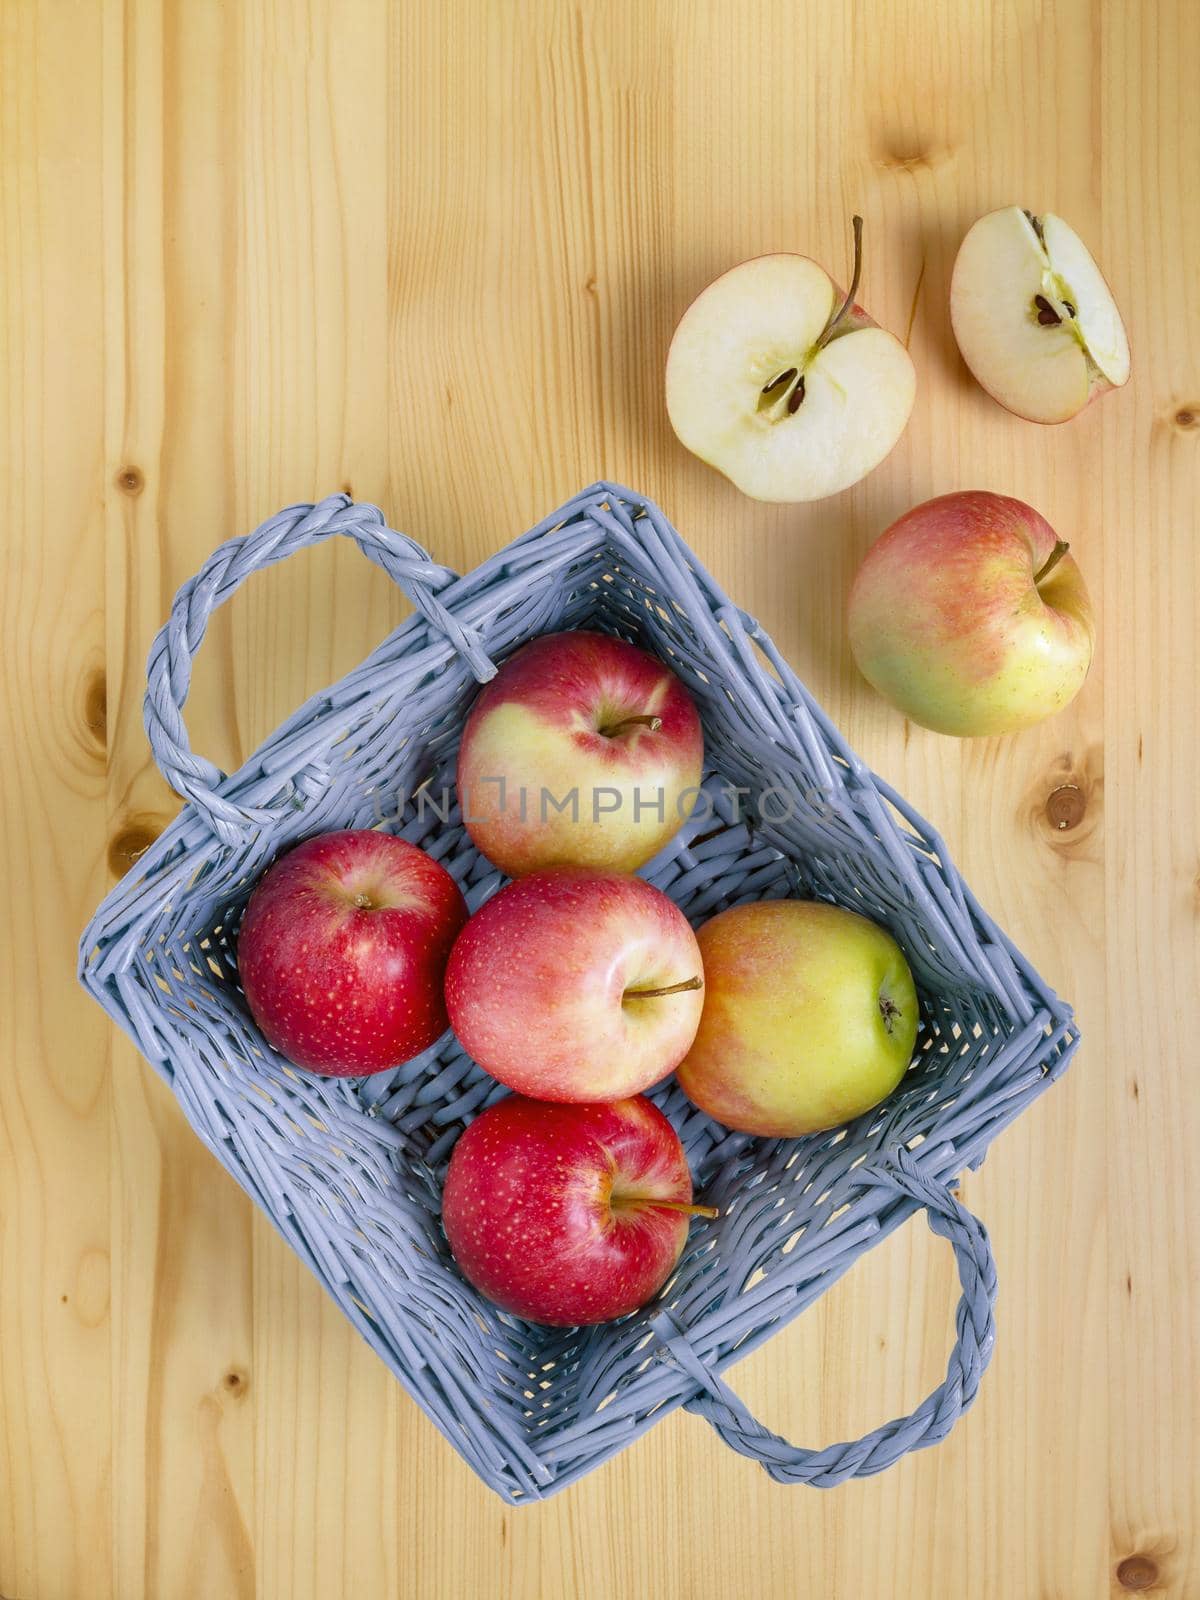 Ripe red and yellow apples in a basket on a bright wooden background. Some out of the bin. Top view.